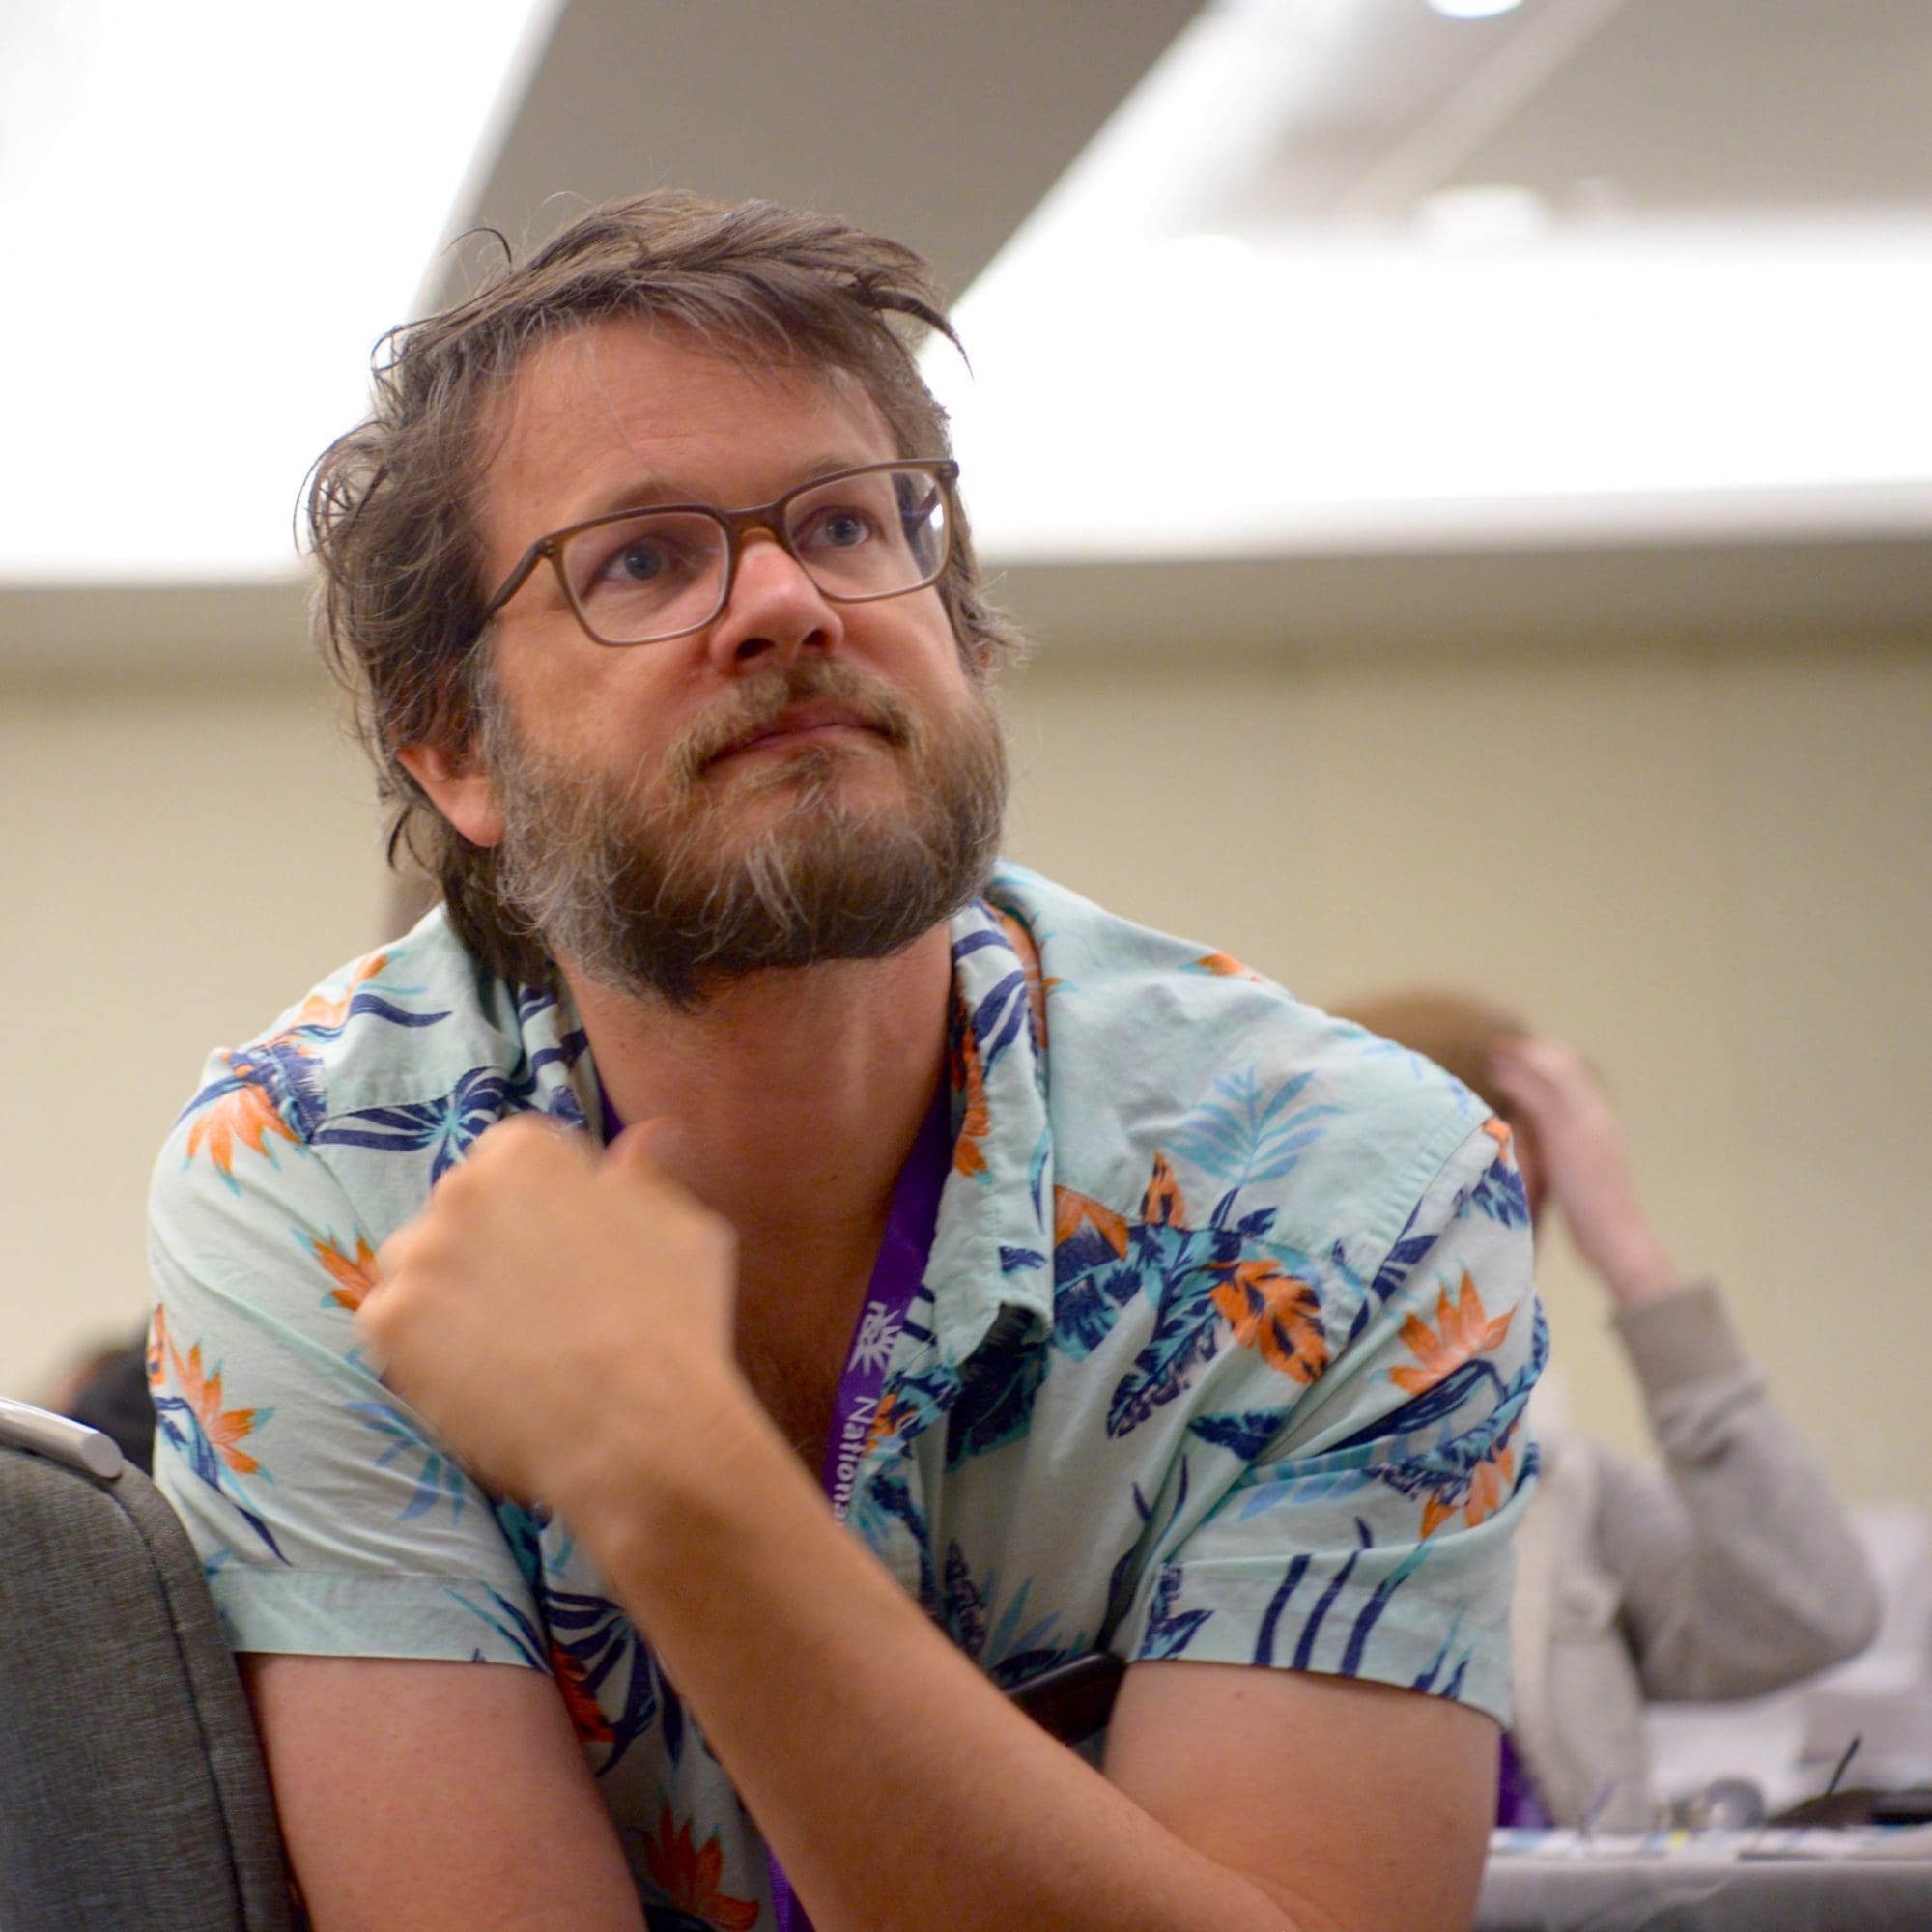 A man wearing a tropical print shirt and glasses looks thoughtfully upwards while sitting in a conference room, pondering his decision to donate to the NSA.